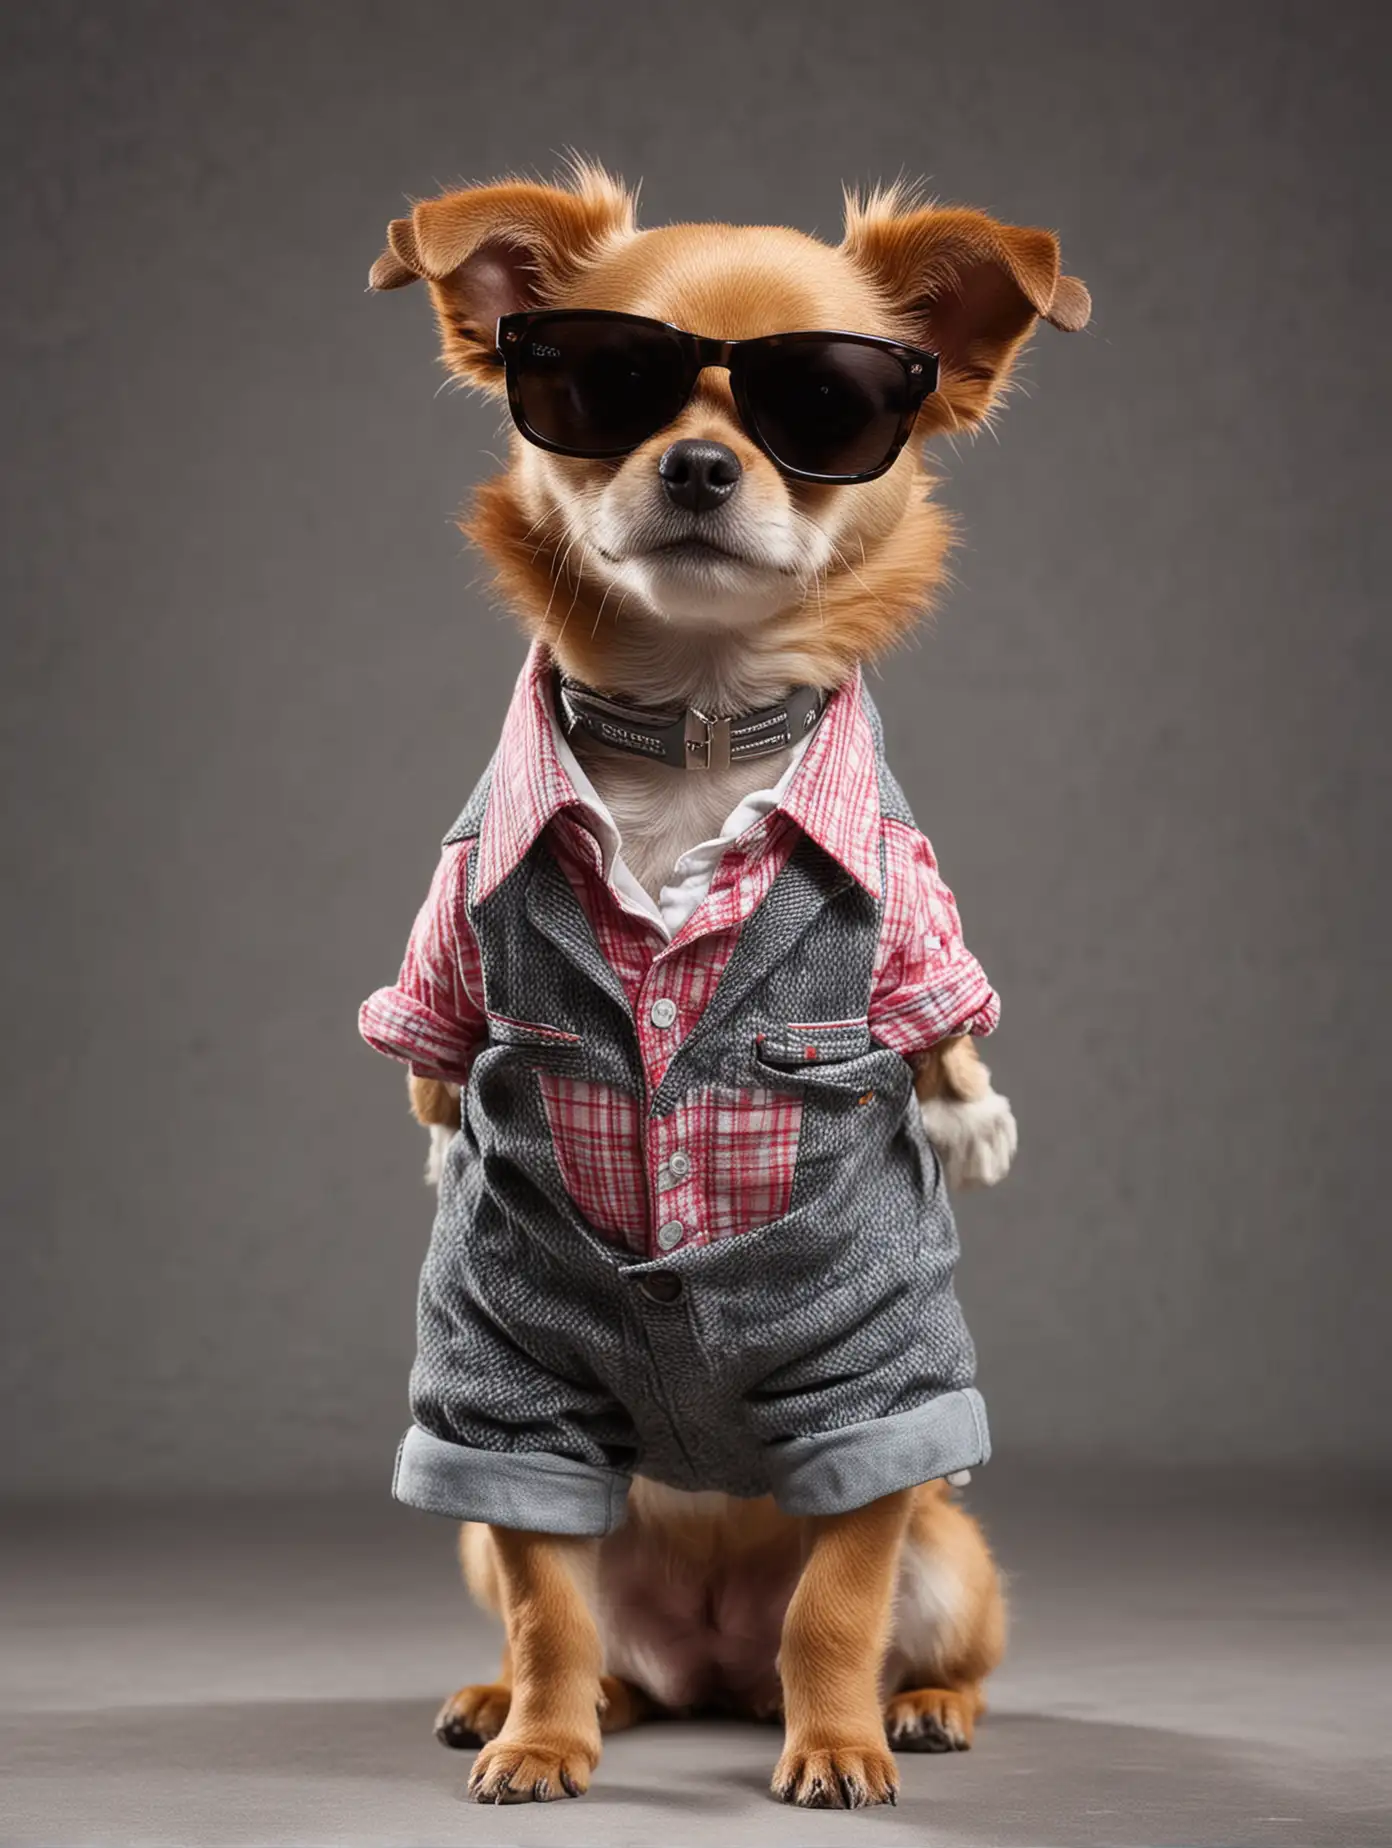 Fashionable-Dog-in-Sunglasses-Strutting-on-T-Stage